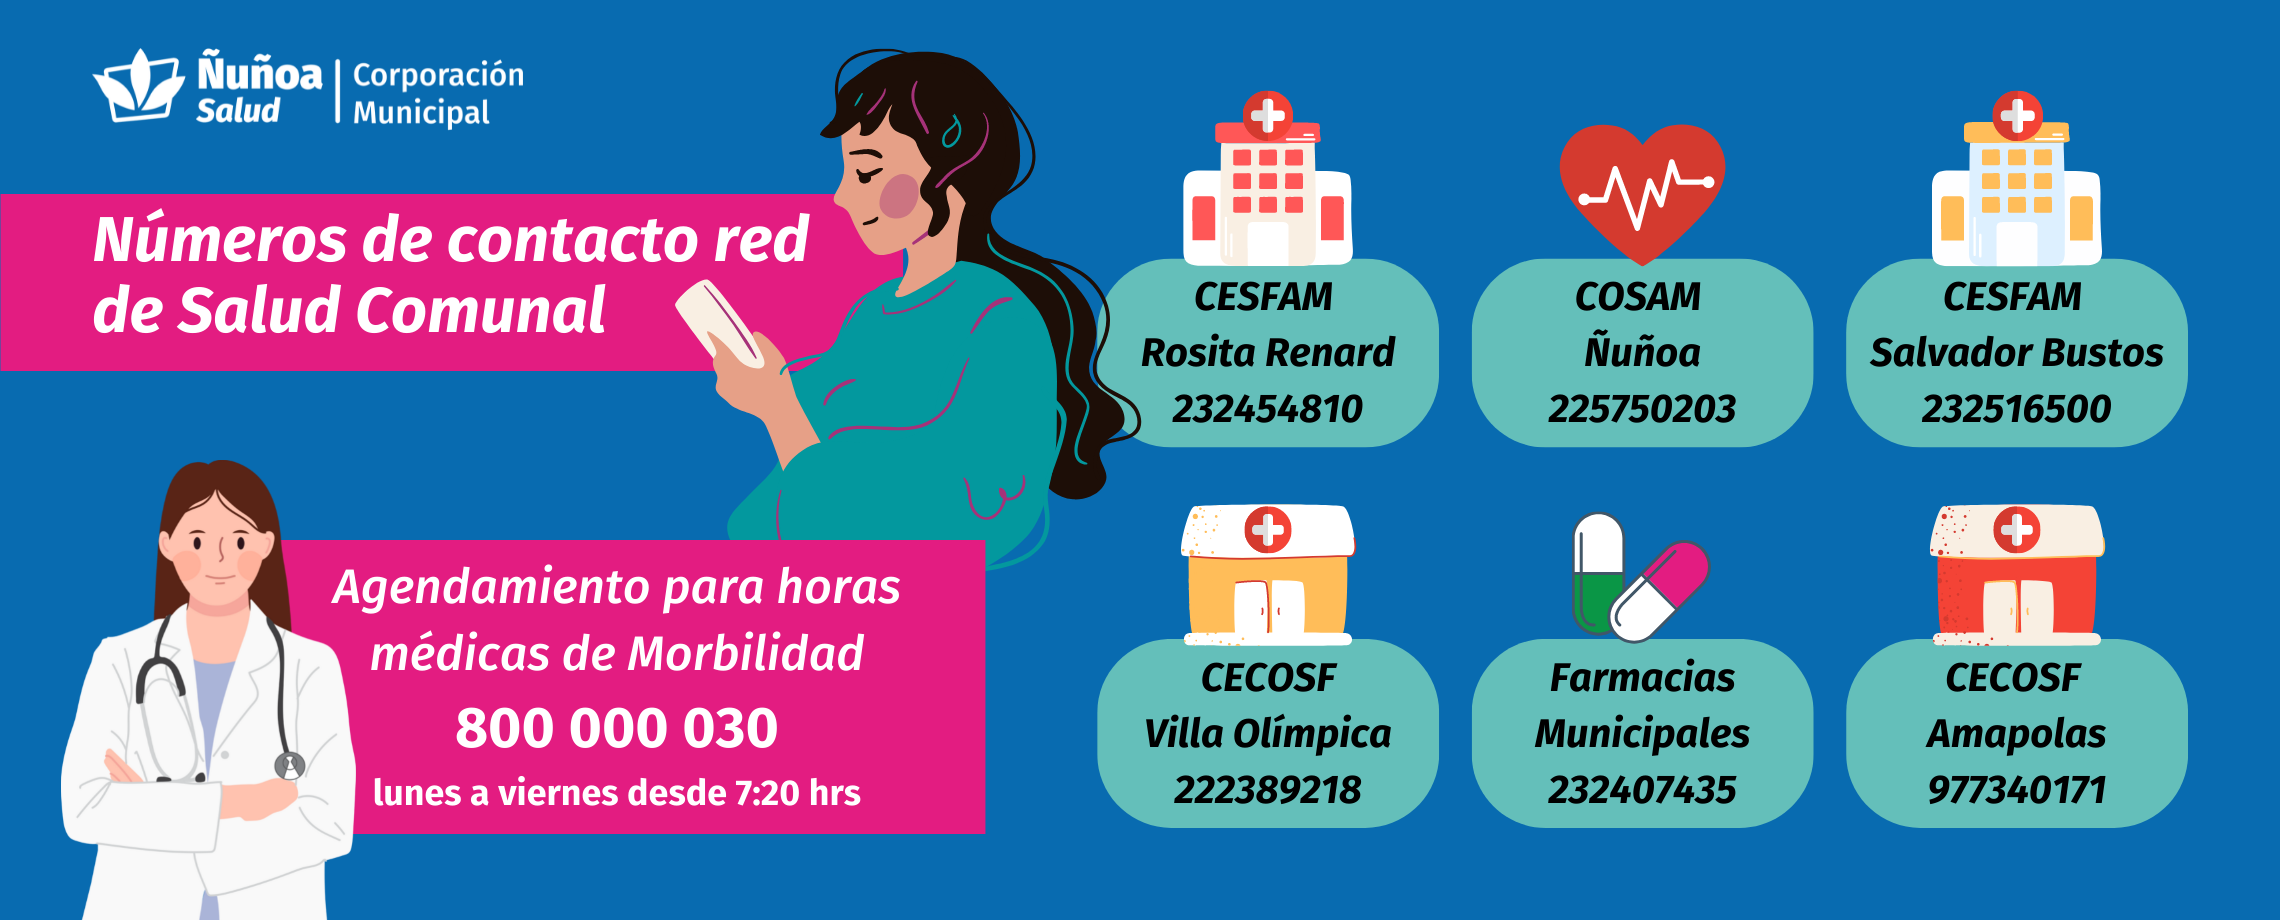 contacto red salud comunal